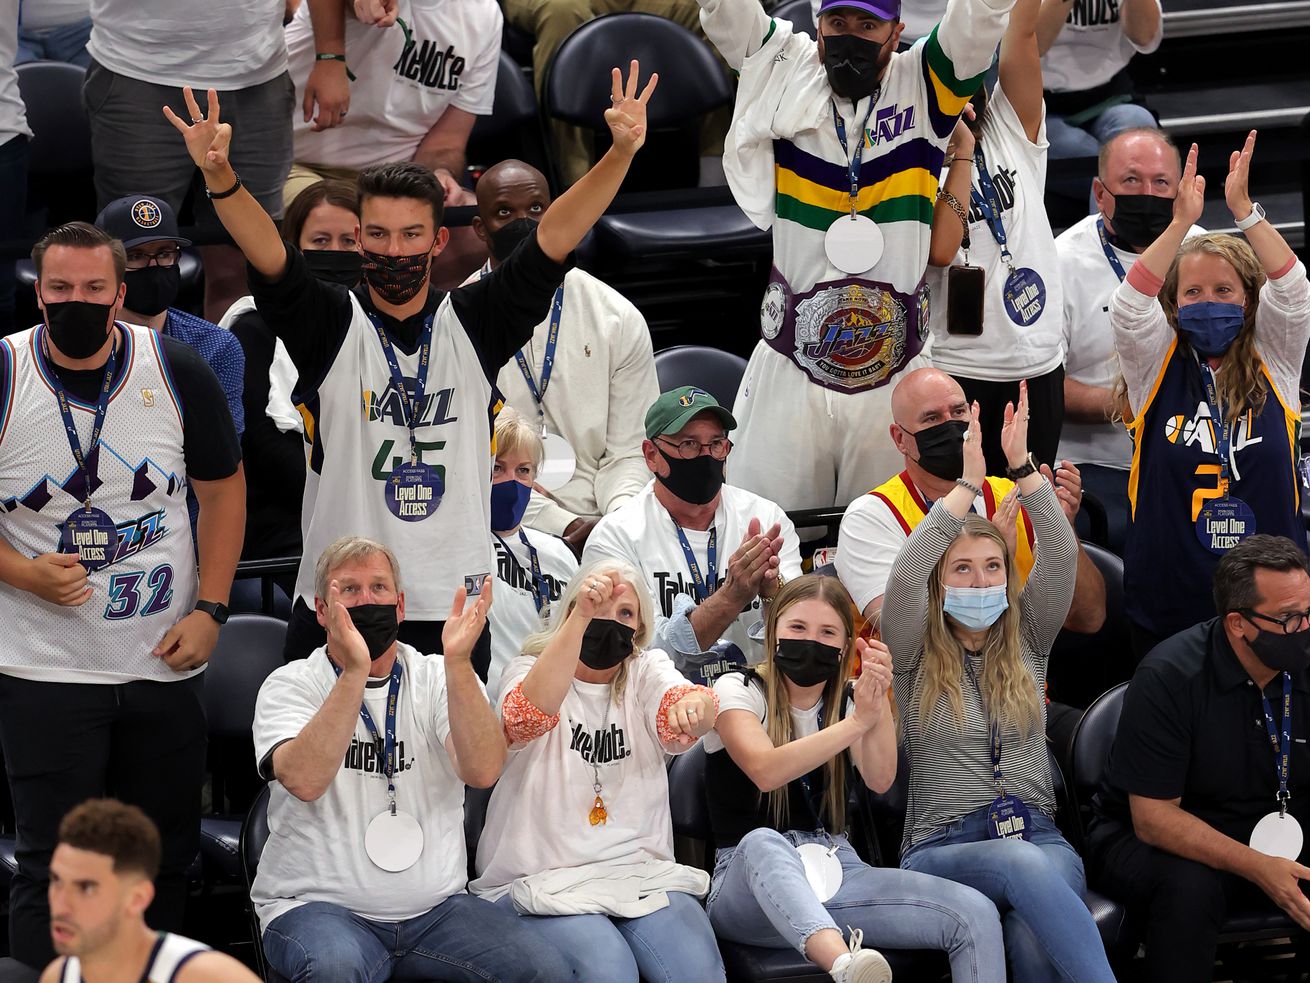 Fans erupt after Jazz forward Georges Niang hit a 3-pointer during Game 1 of their NBA playoff series against the Grizzlies.